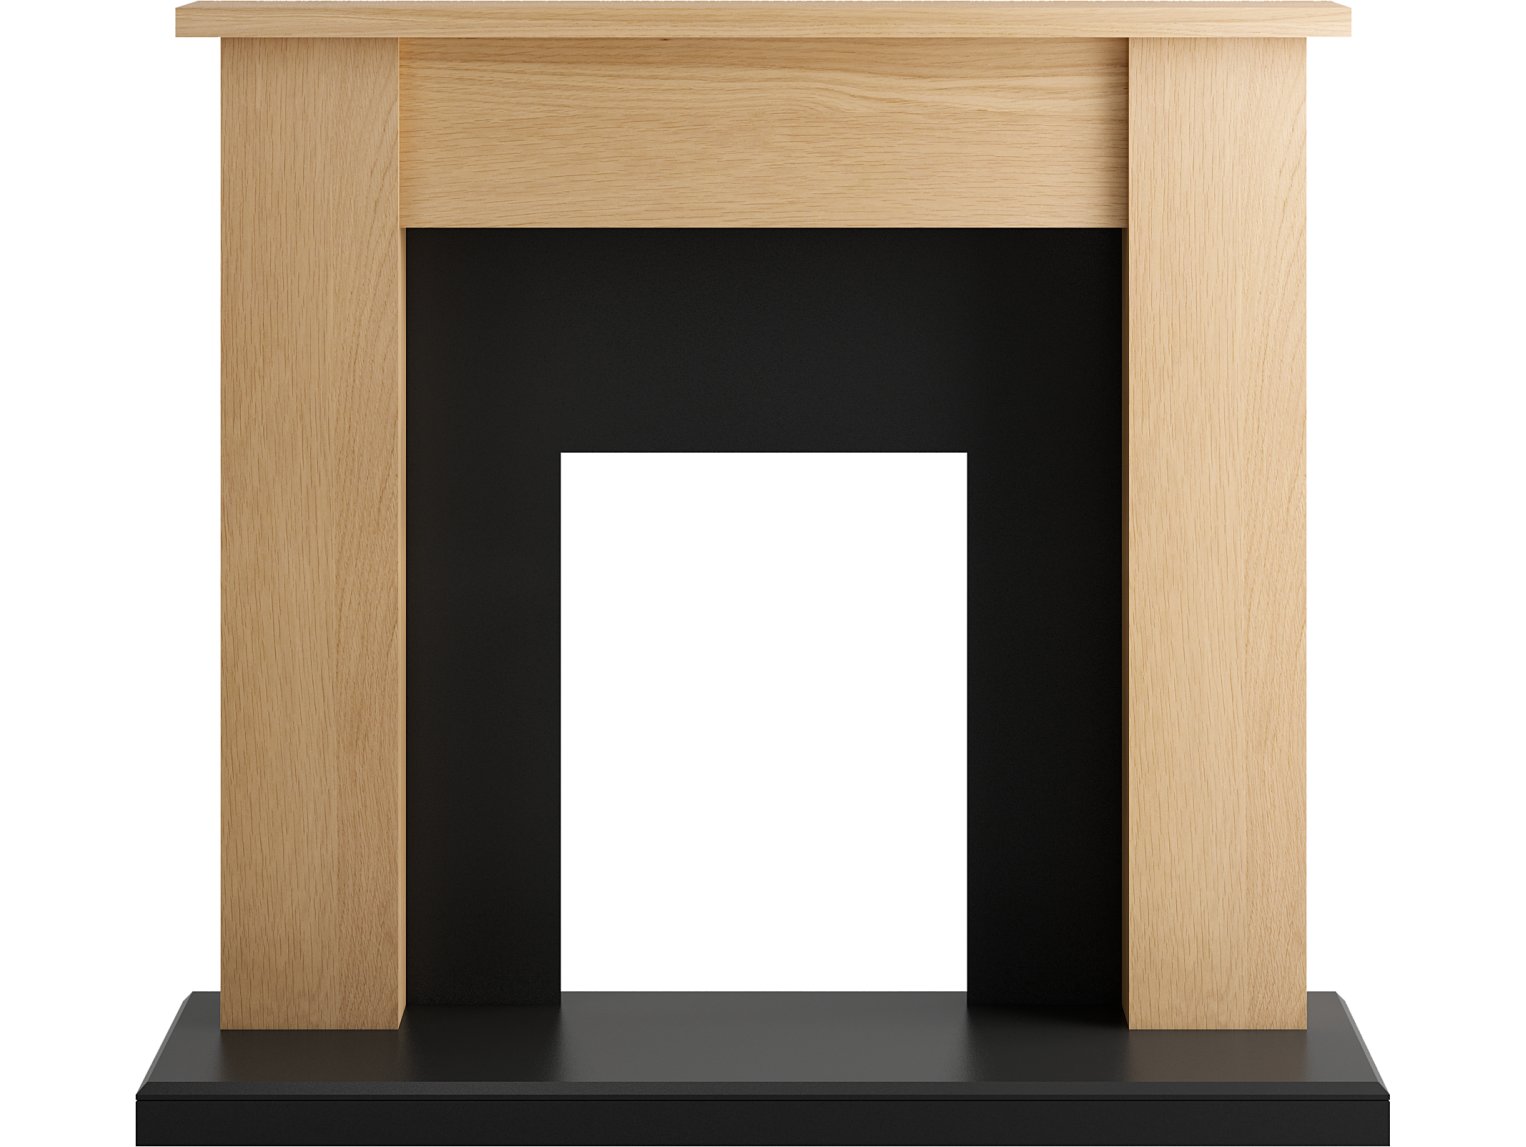 Adam New England Fireplace in Oak and Black, 48 Inch